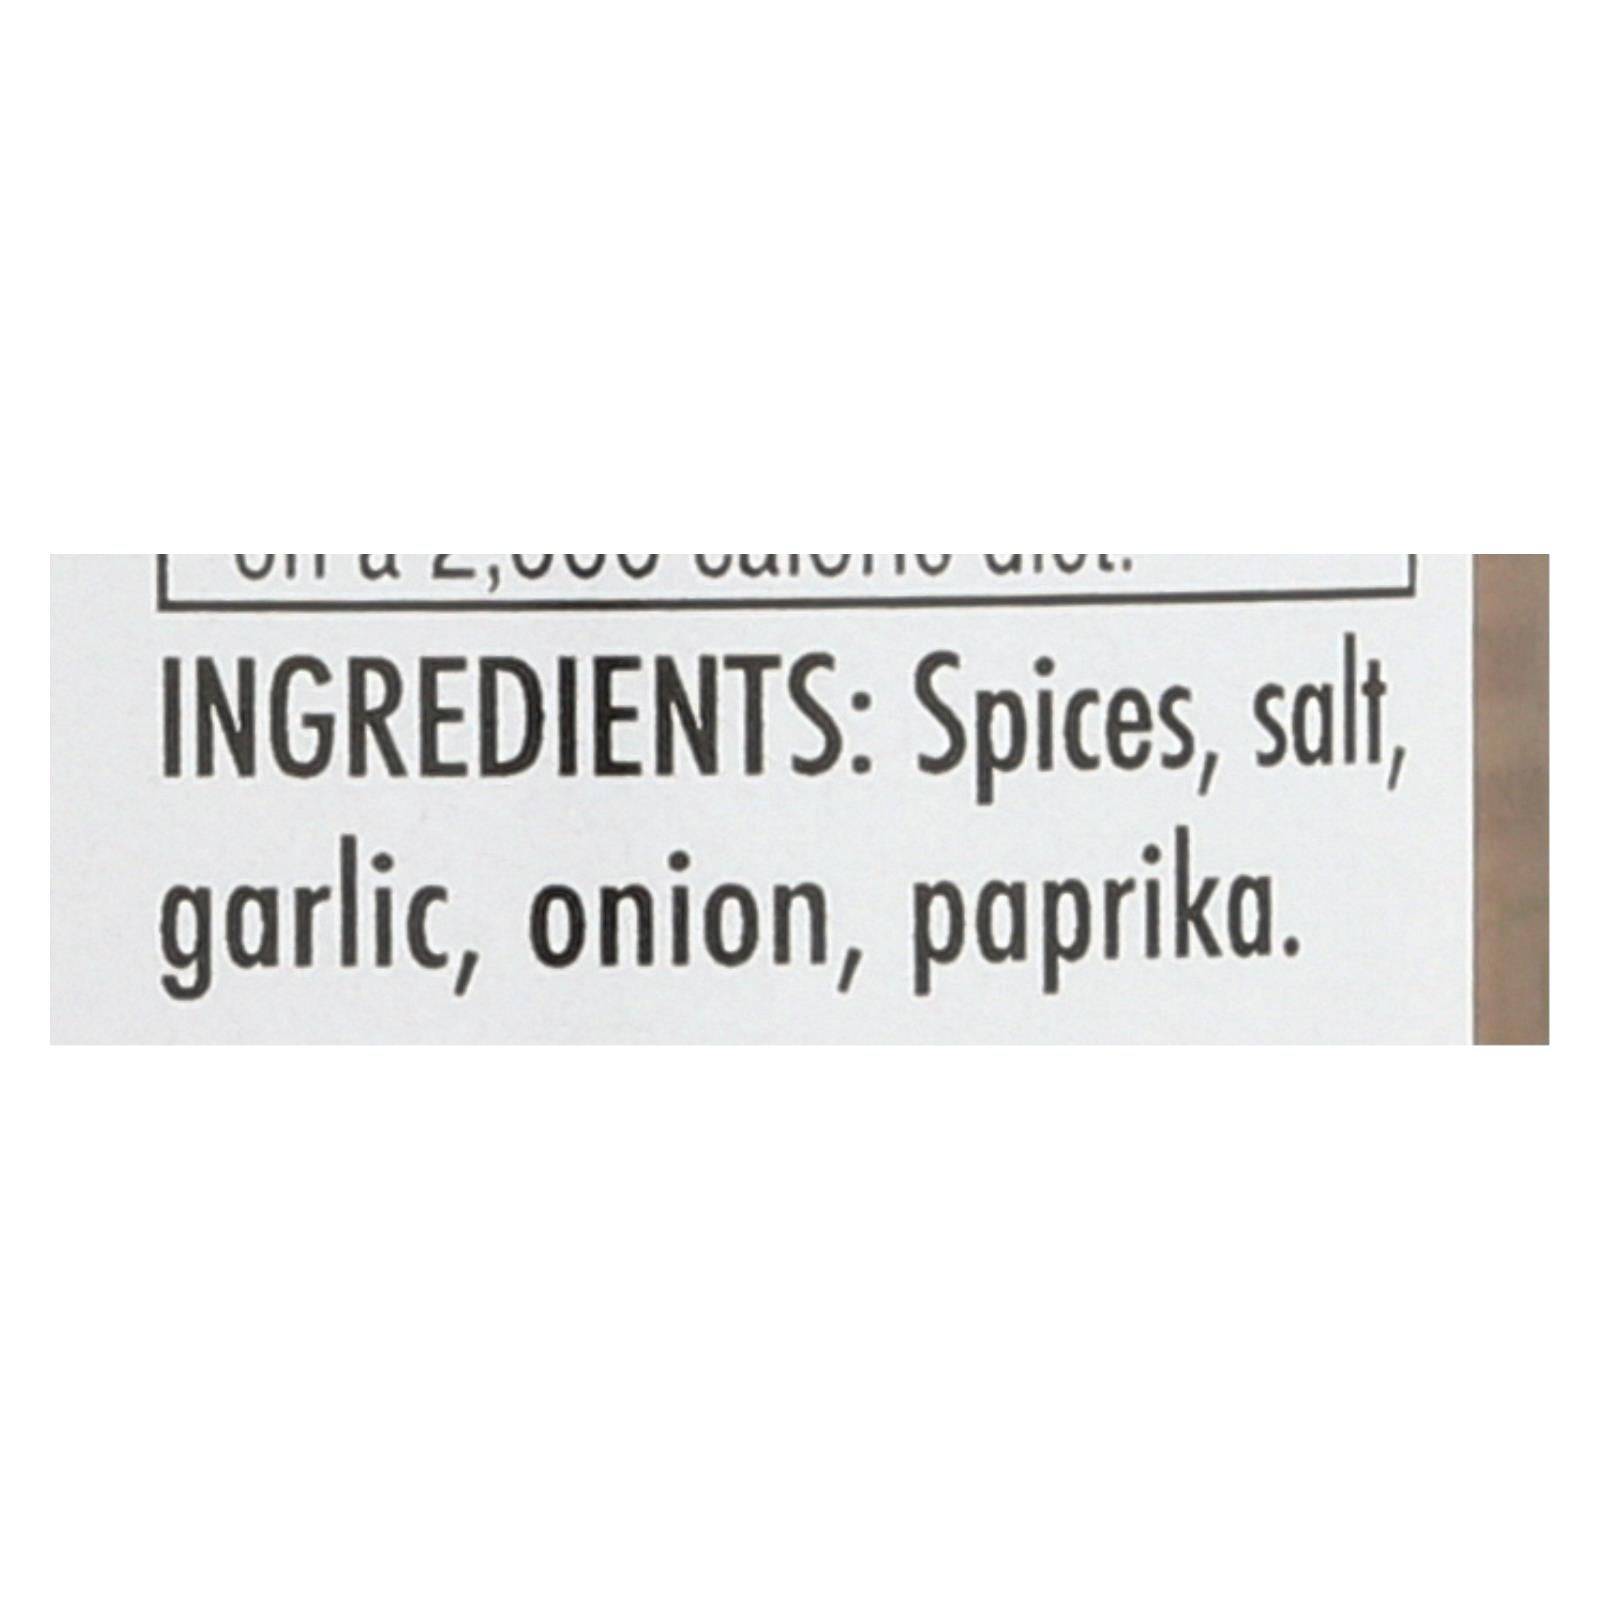 Magic Seasonings Chef Paul Prudhommes Magic Seasoning Blends - Poultry Magic - 2 Oz - Case Of 6 | OnlyNaturals.us